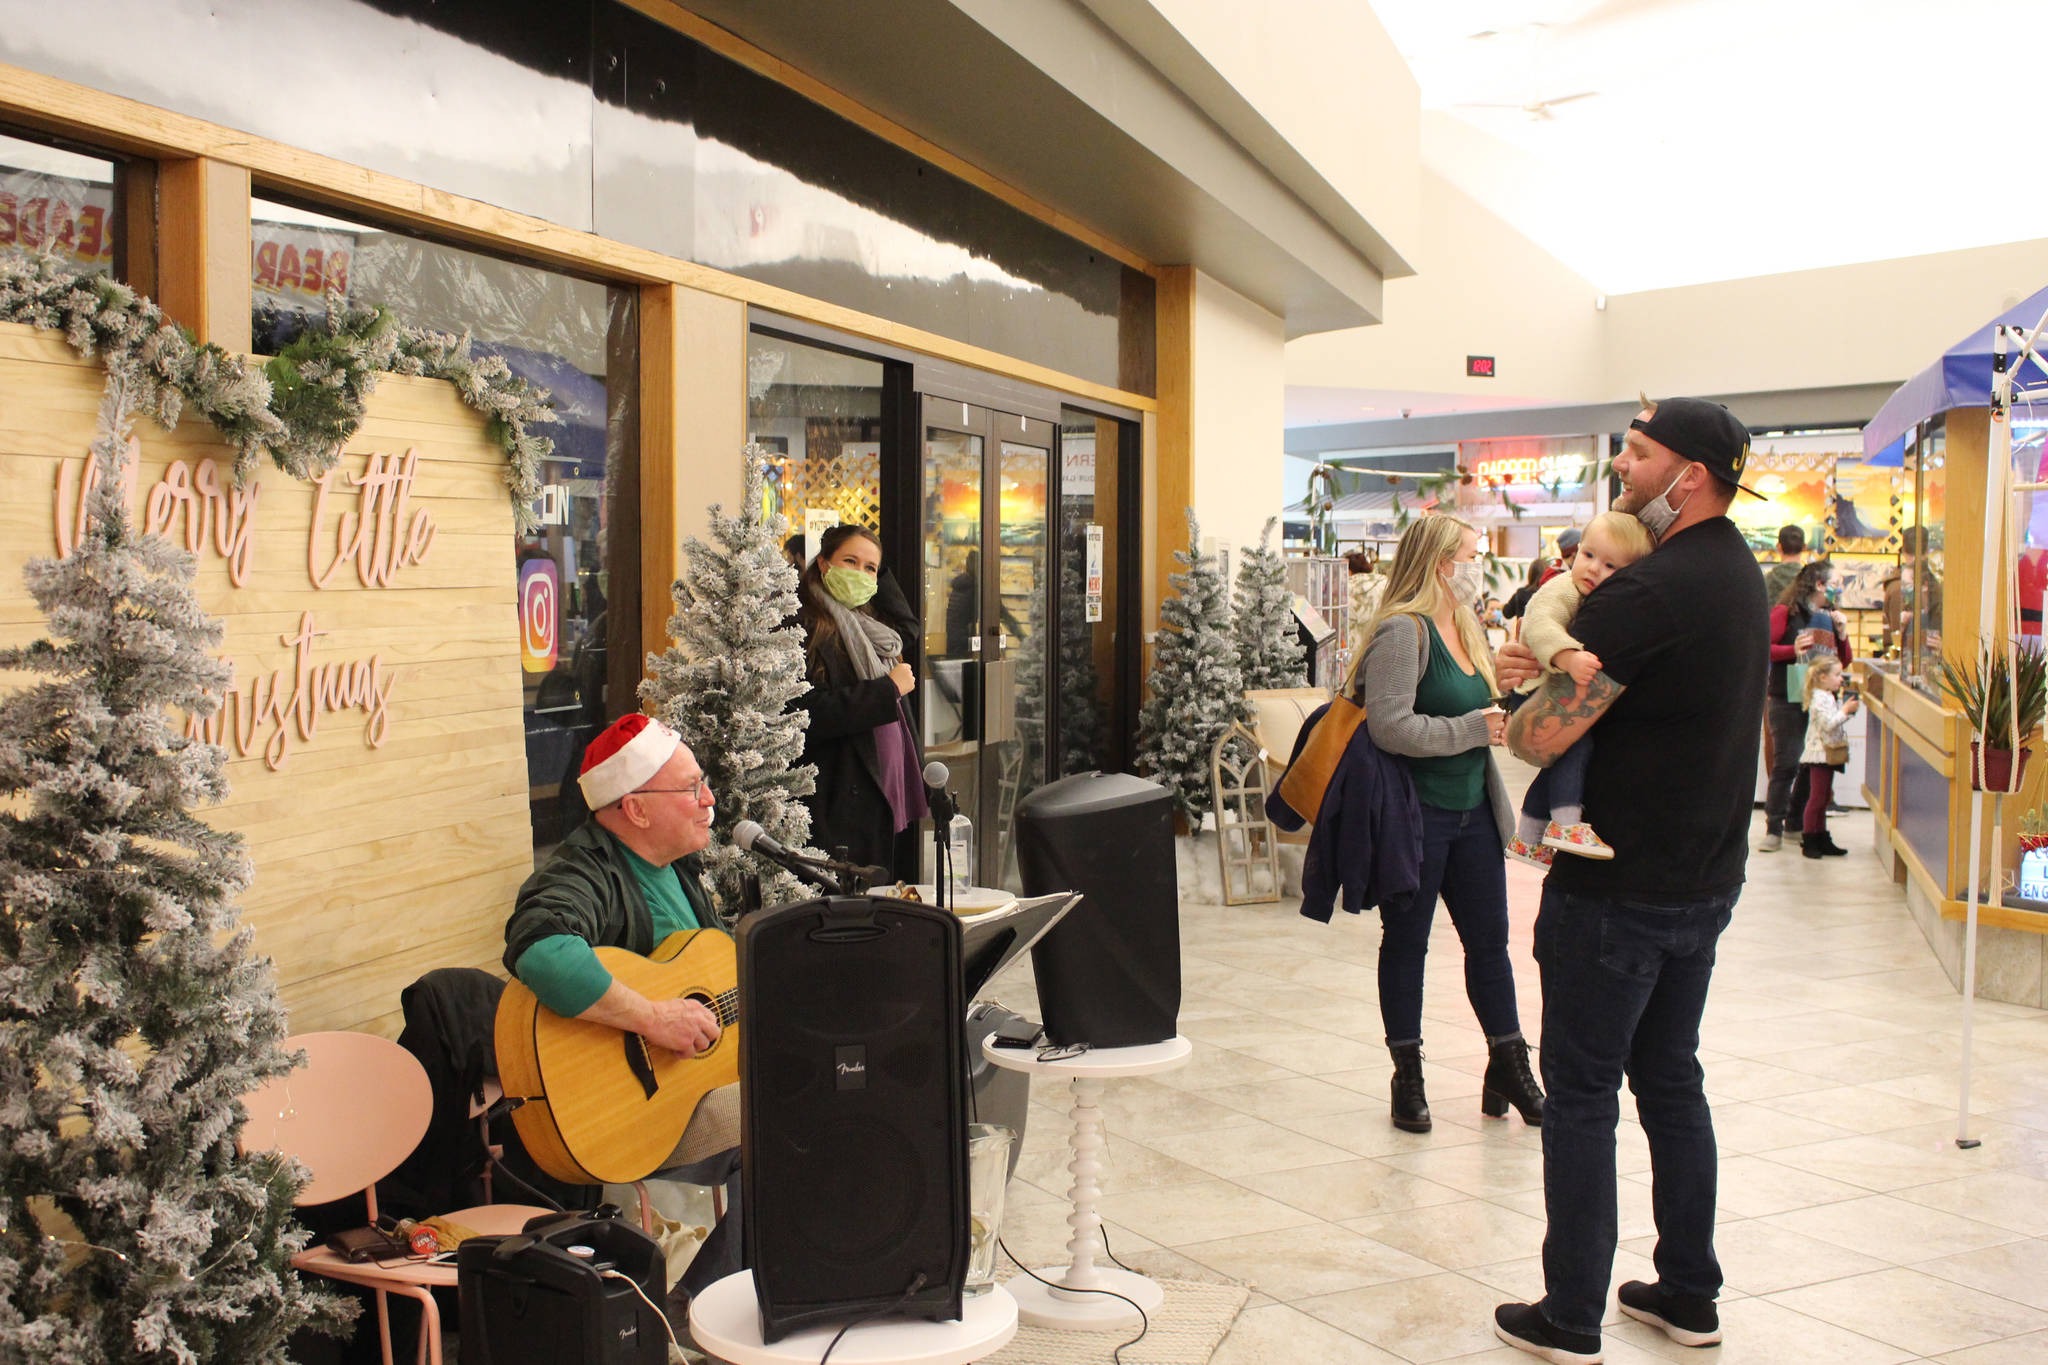 Mike Morgan, left, serenades Joshua and Violet Veldstra, right, with a rendition of “Baby Beluga” during the Merry Little Christmas Market at the Peninsula Center Mall in Soldotna, Alaska, on Nov. 7, 2020 (Photo by Brian Mazurek/Peninsula Clarion)